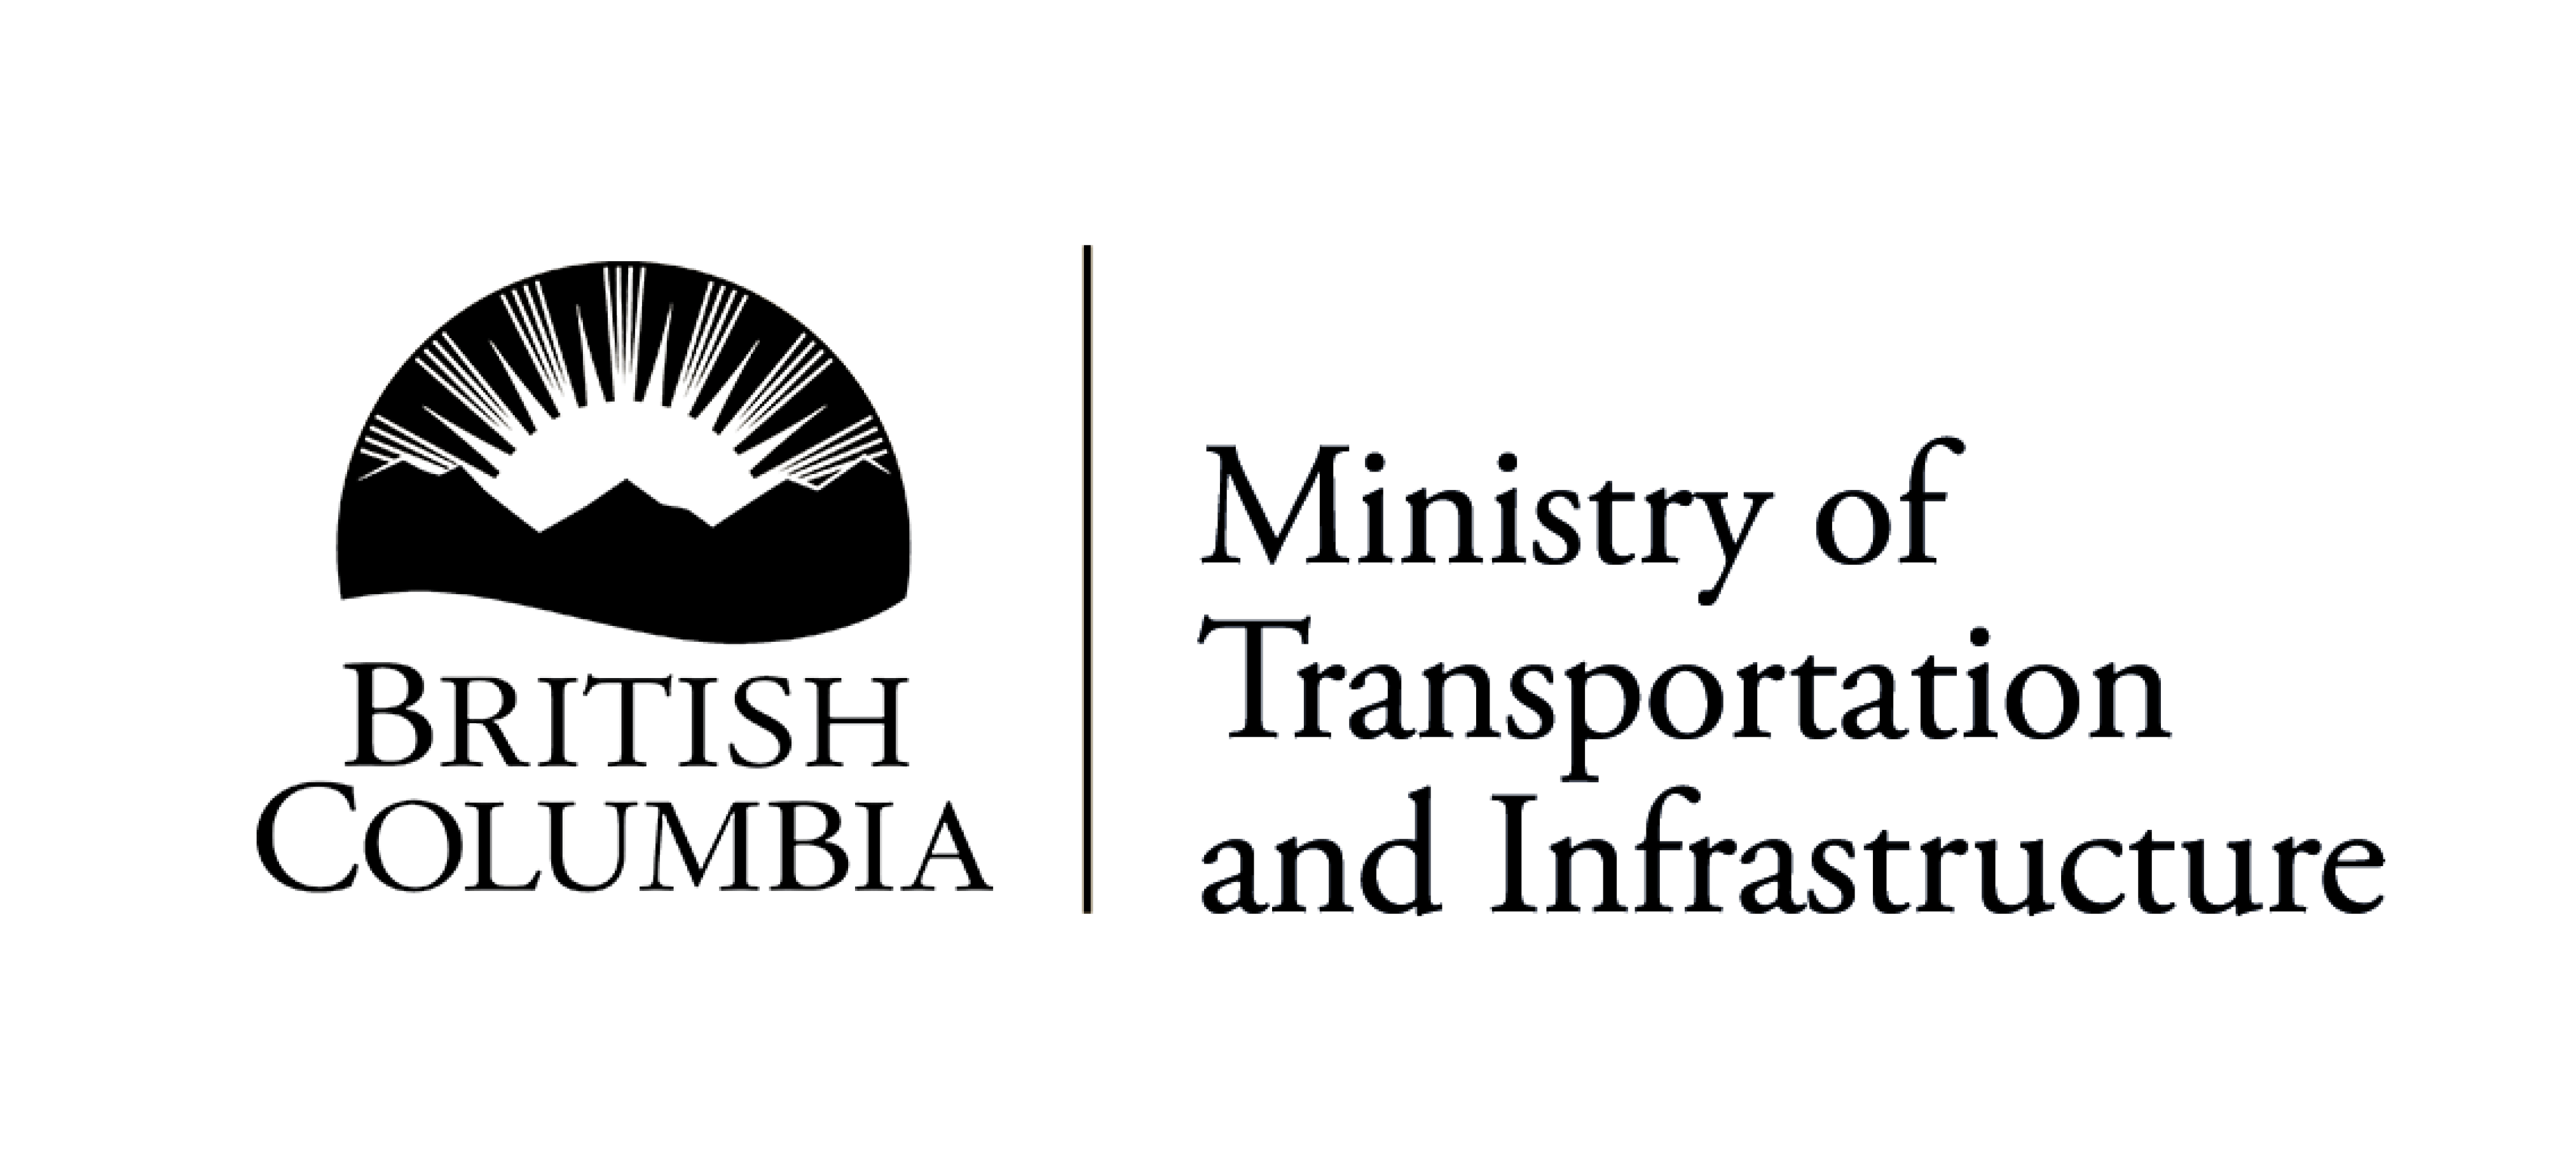 ministry-of-transportation-and-infrastructure